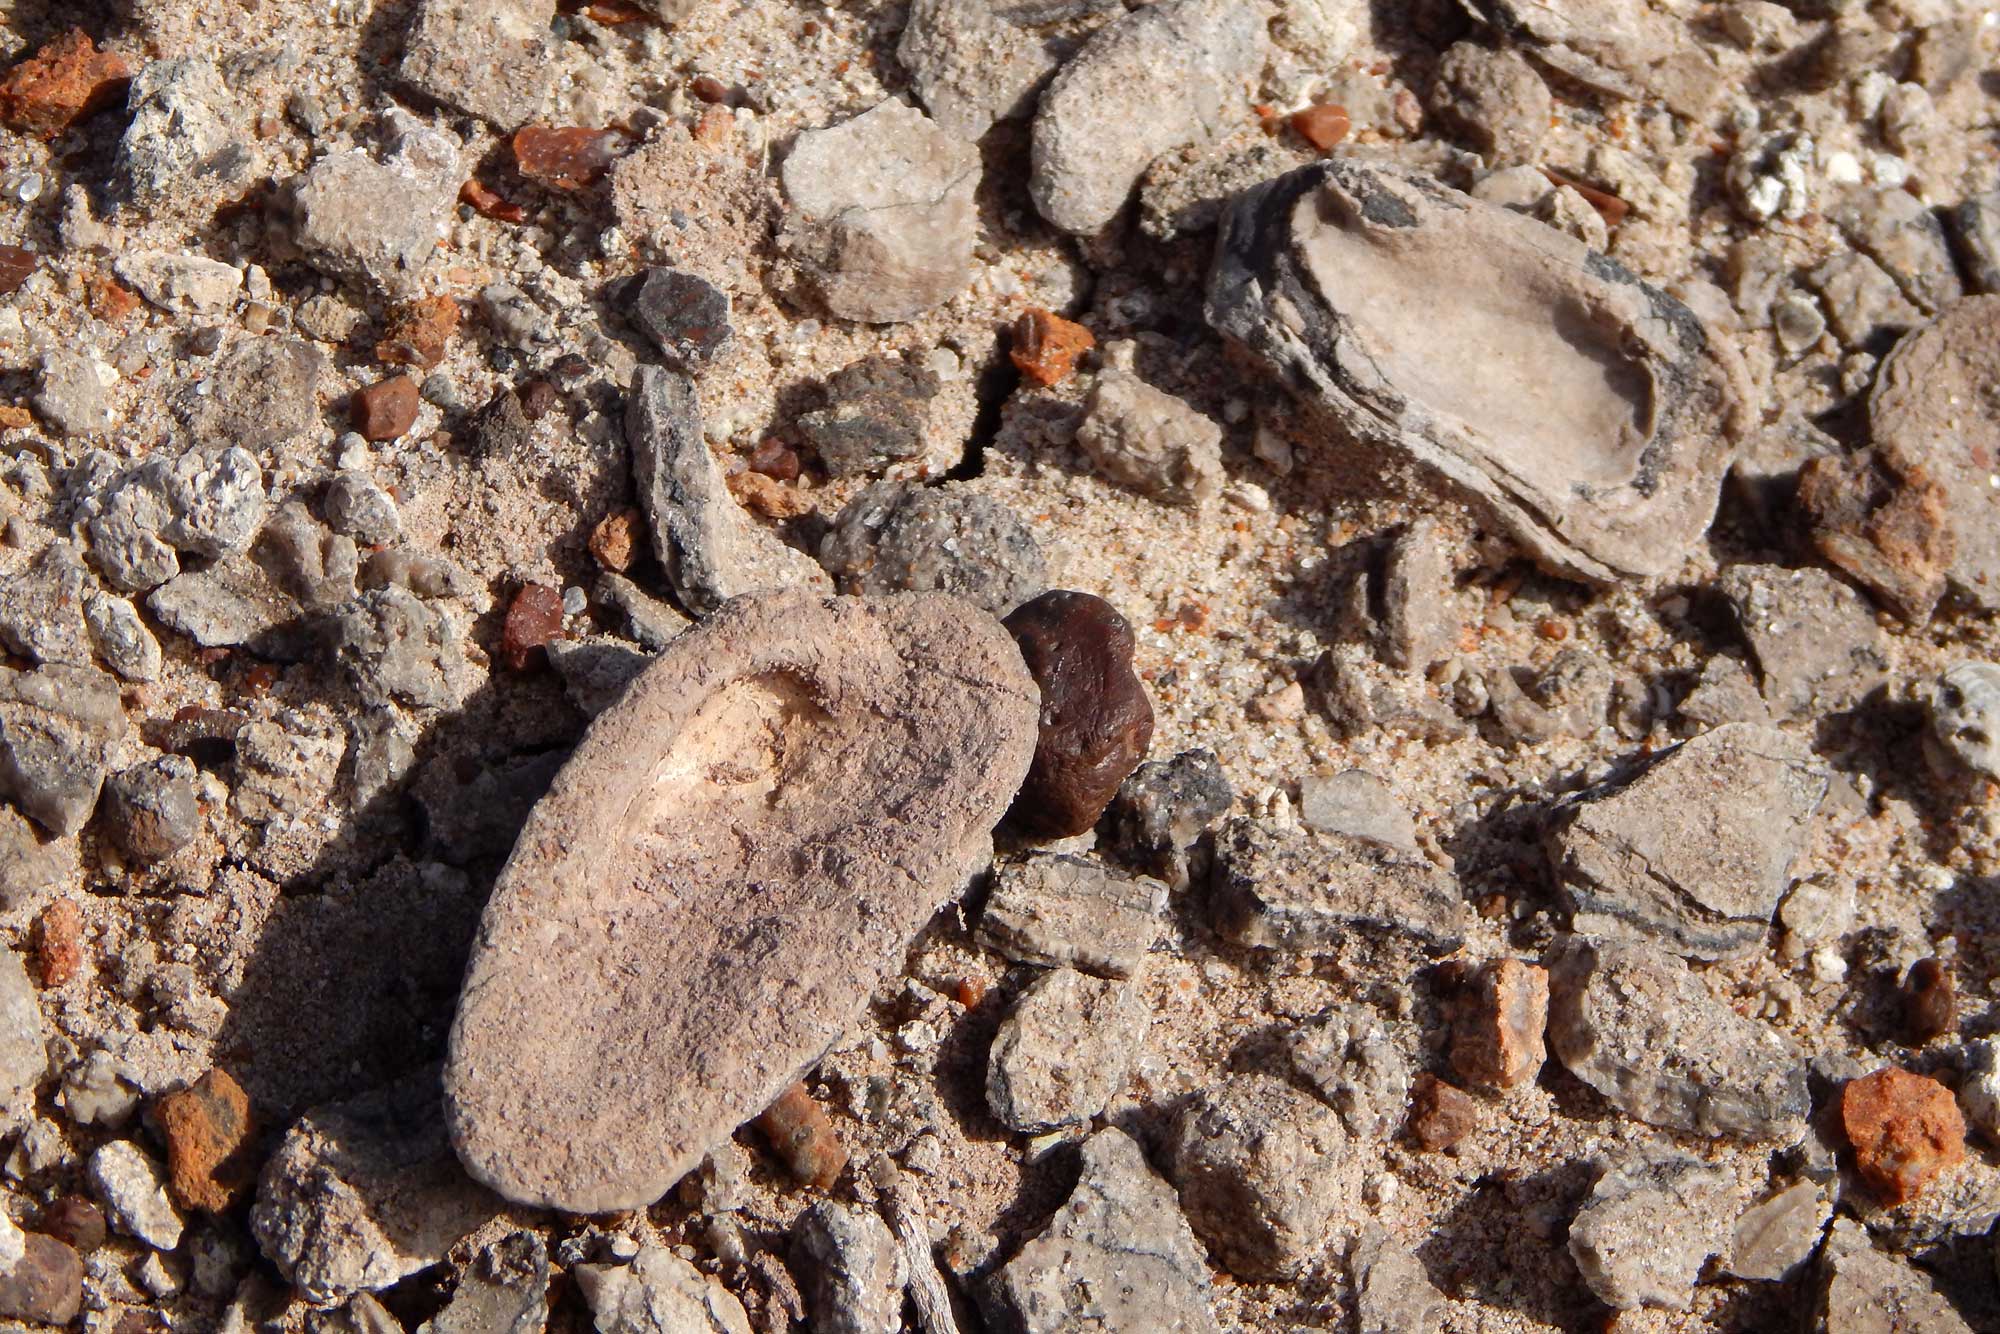 Photograph of Triassic clam fossils from the Chinle Formation, Arizona. The fossils are in situ (in place where they were found). Each is one valve (half) of a clam shell. The ground that are sitting on is littered with small stones.